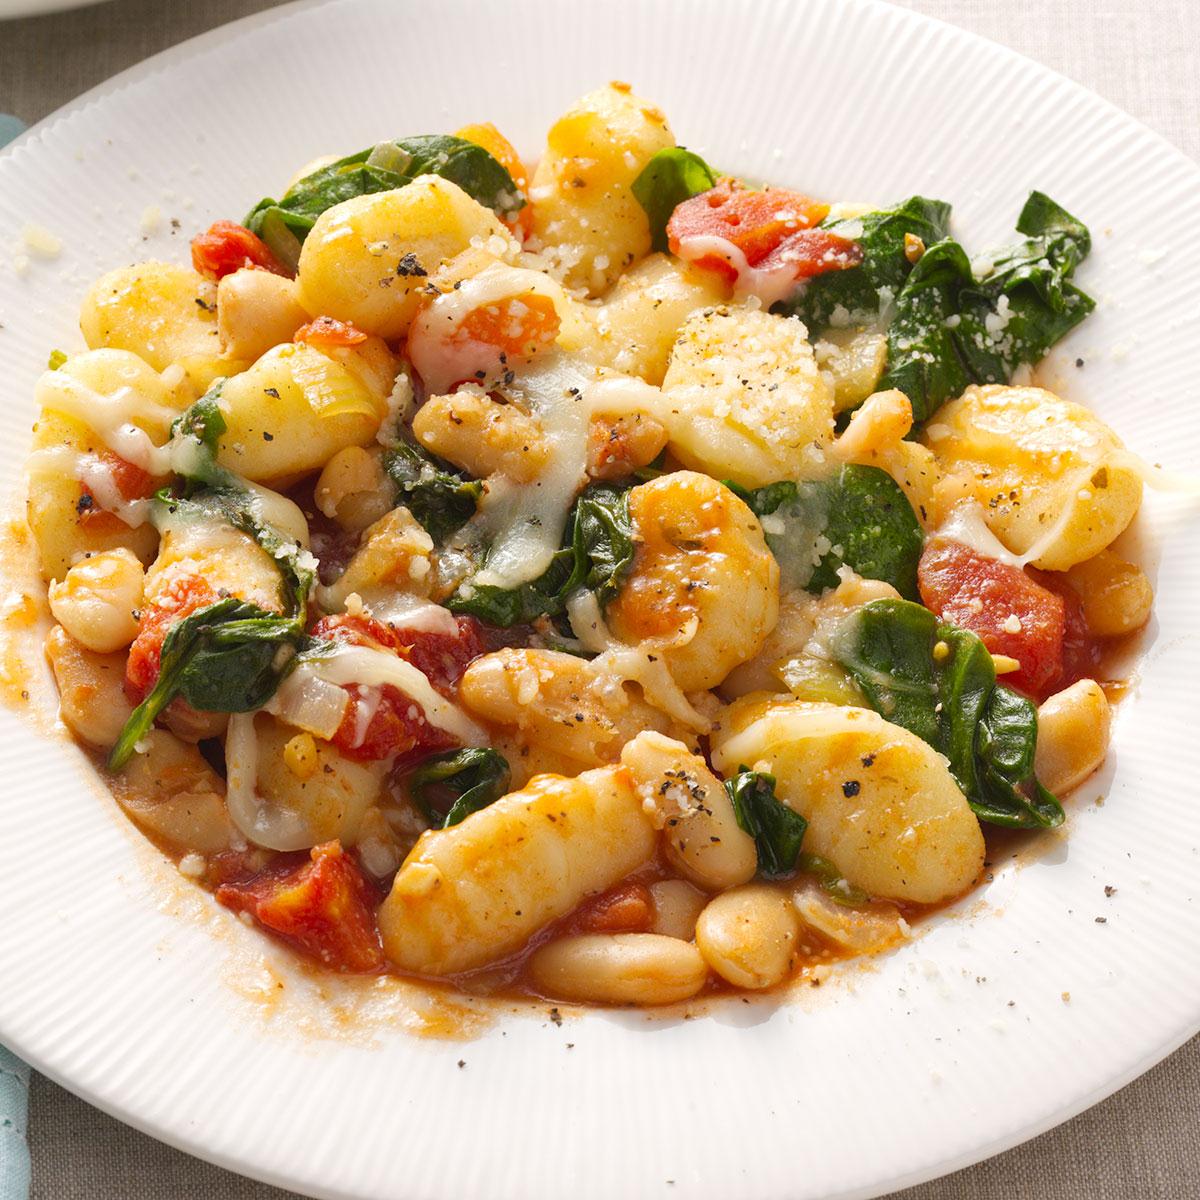 Gnocchi with White Beans Recipe: How to Make It